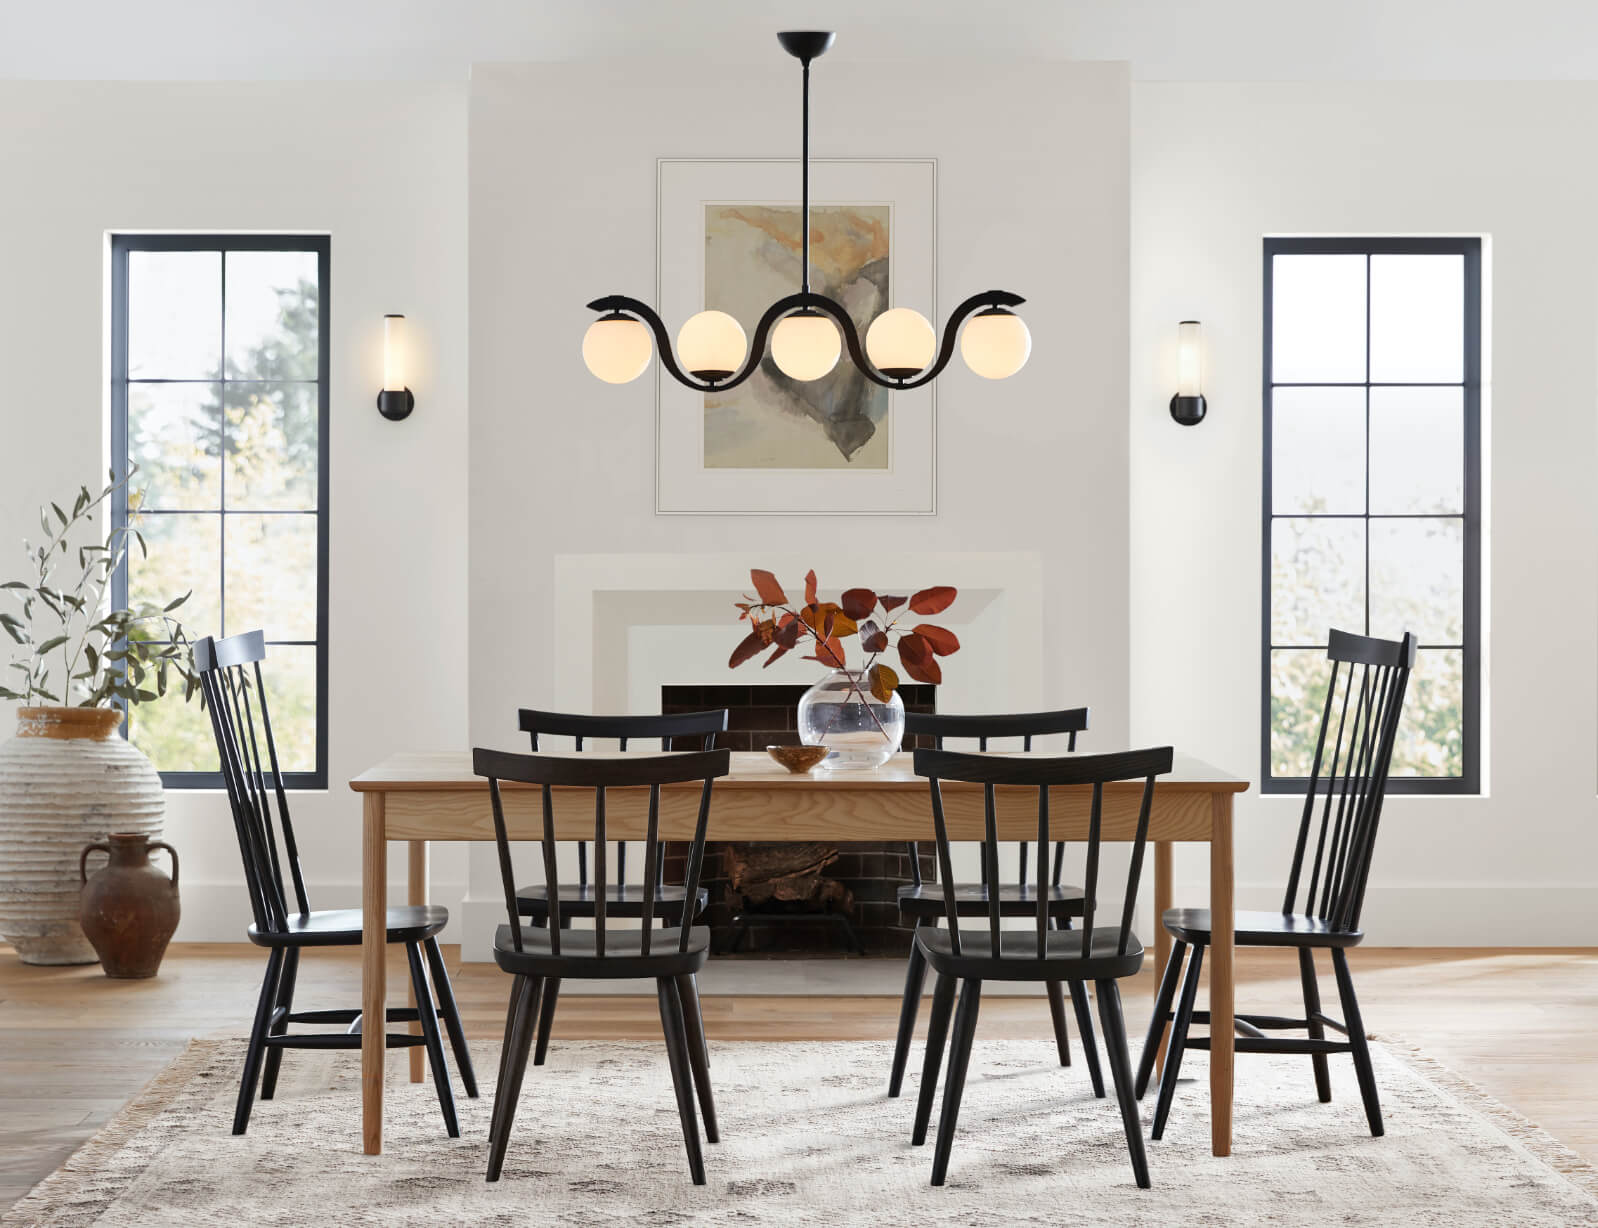 How To Choose Dining Room Lighting, Pendant Light Height Over Kitchen Table